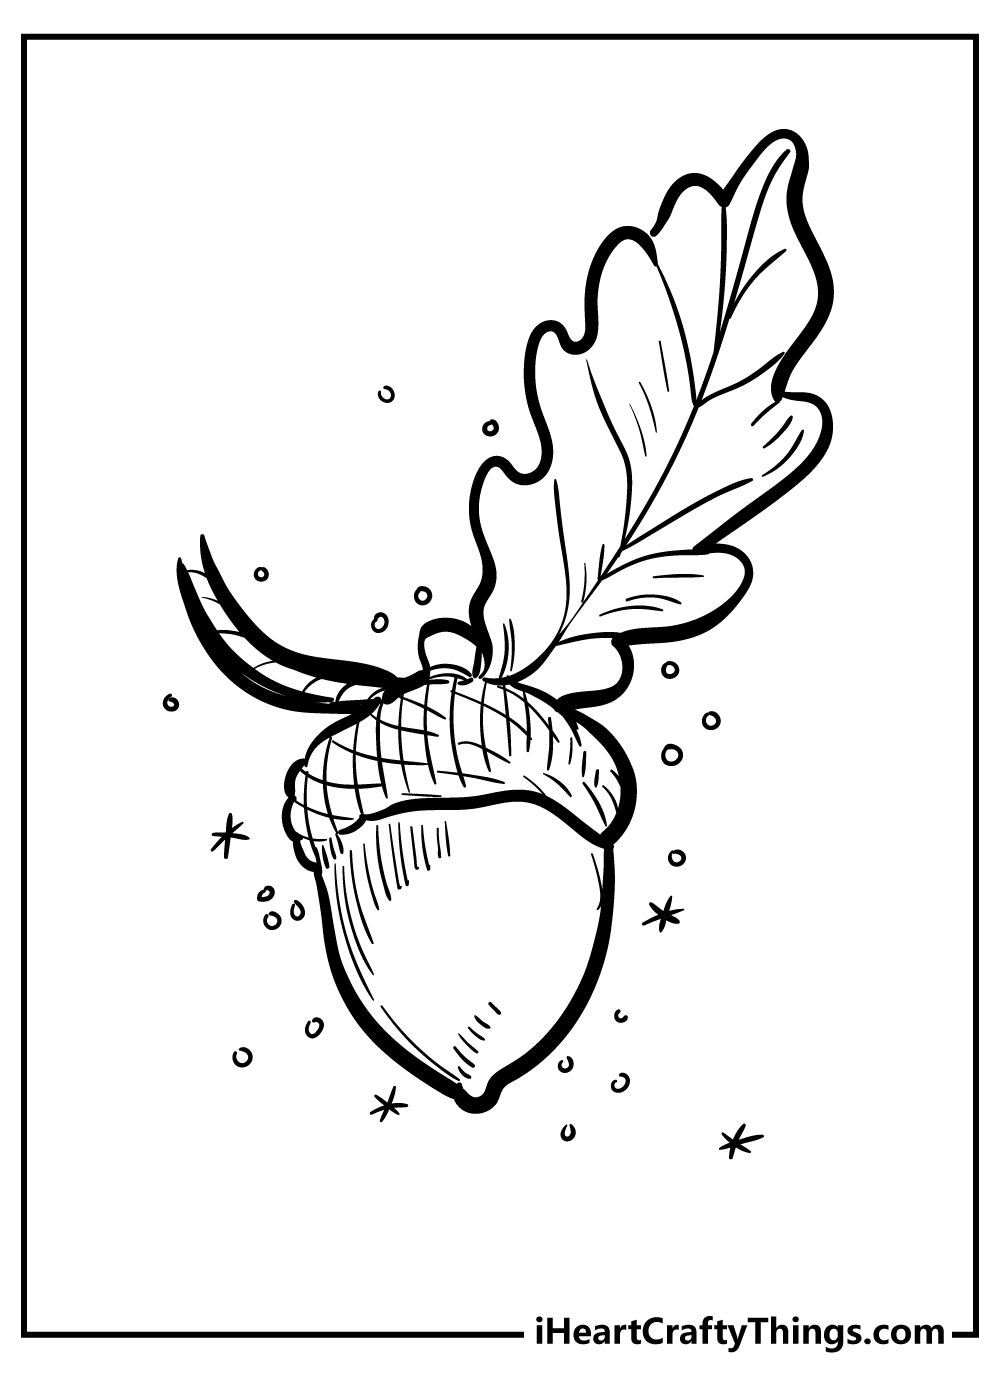 Acorn Coloring Pages for kids free download